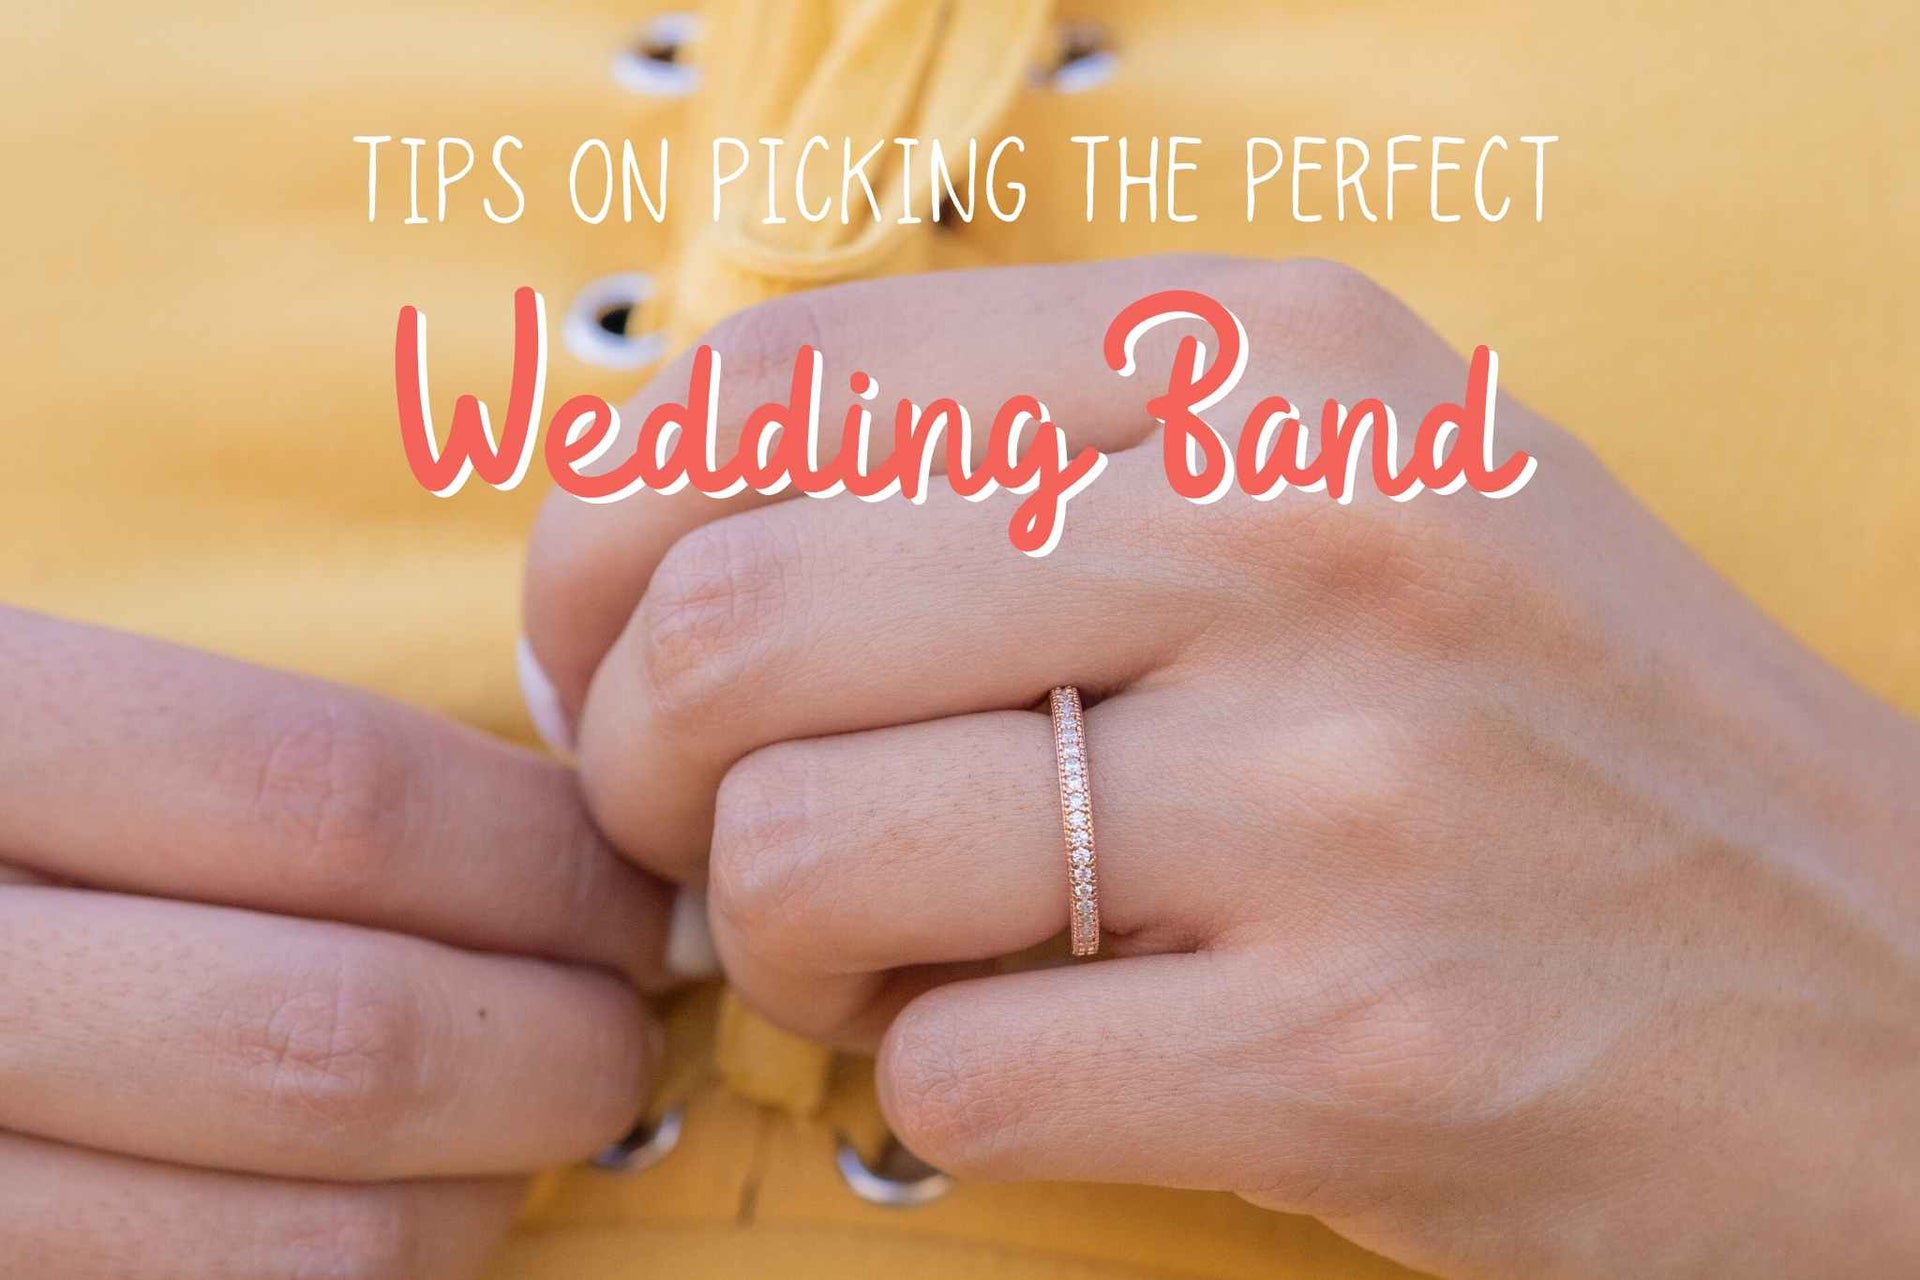 Tips on Picking the Perfect Wedding Band